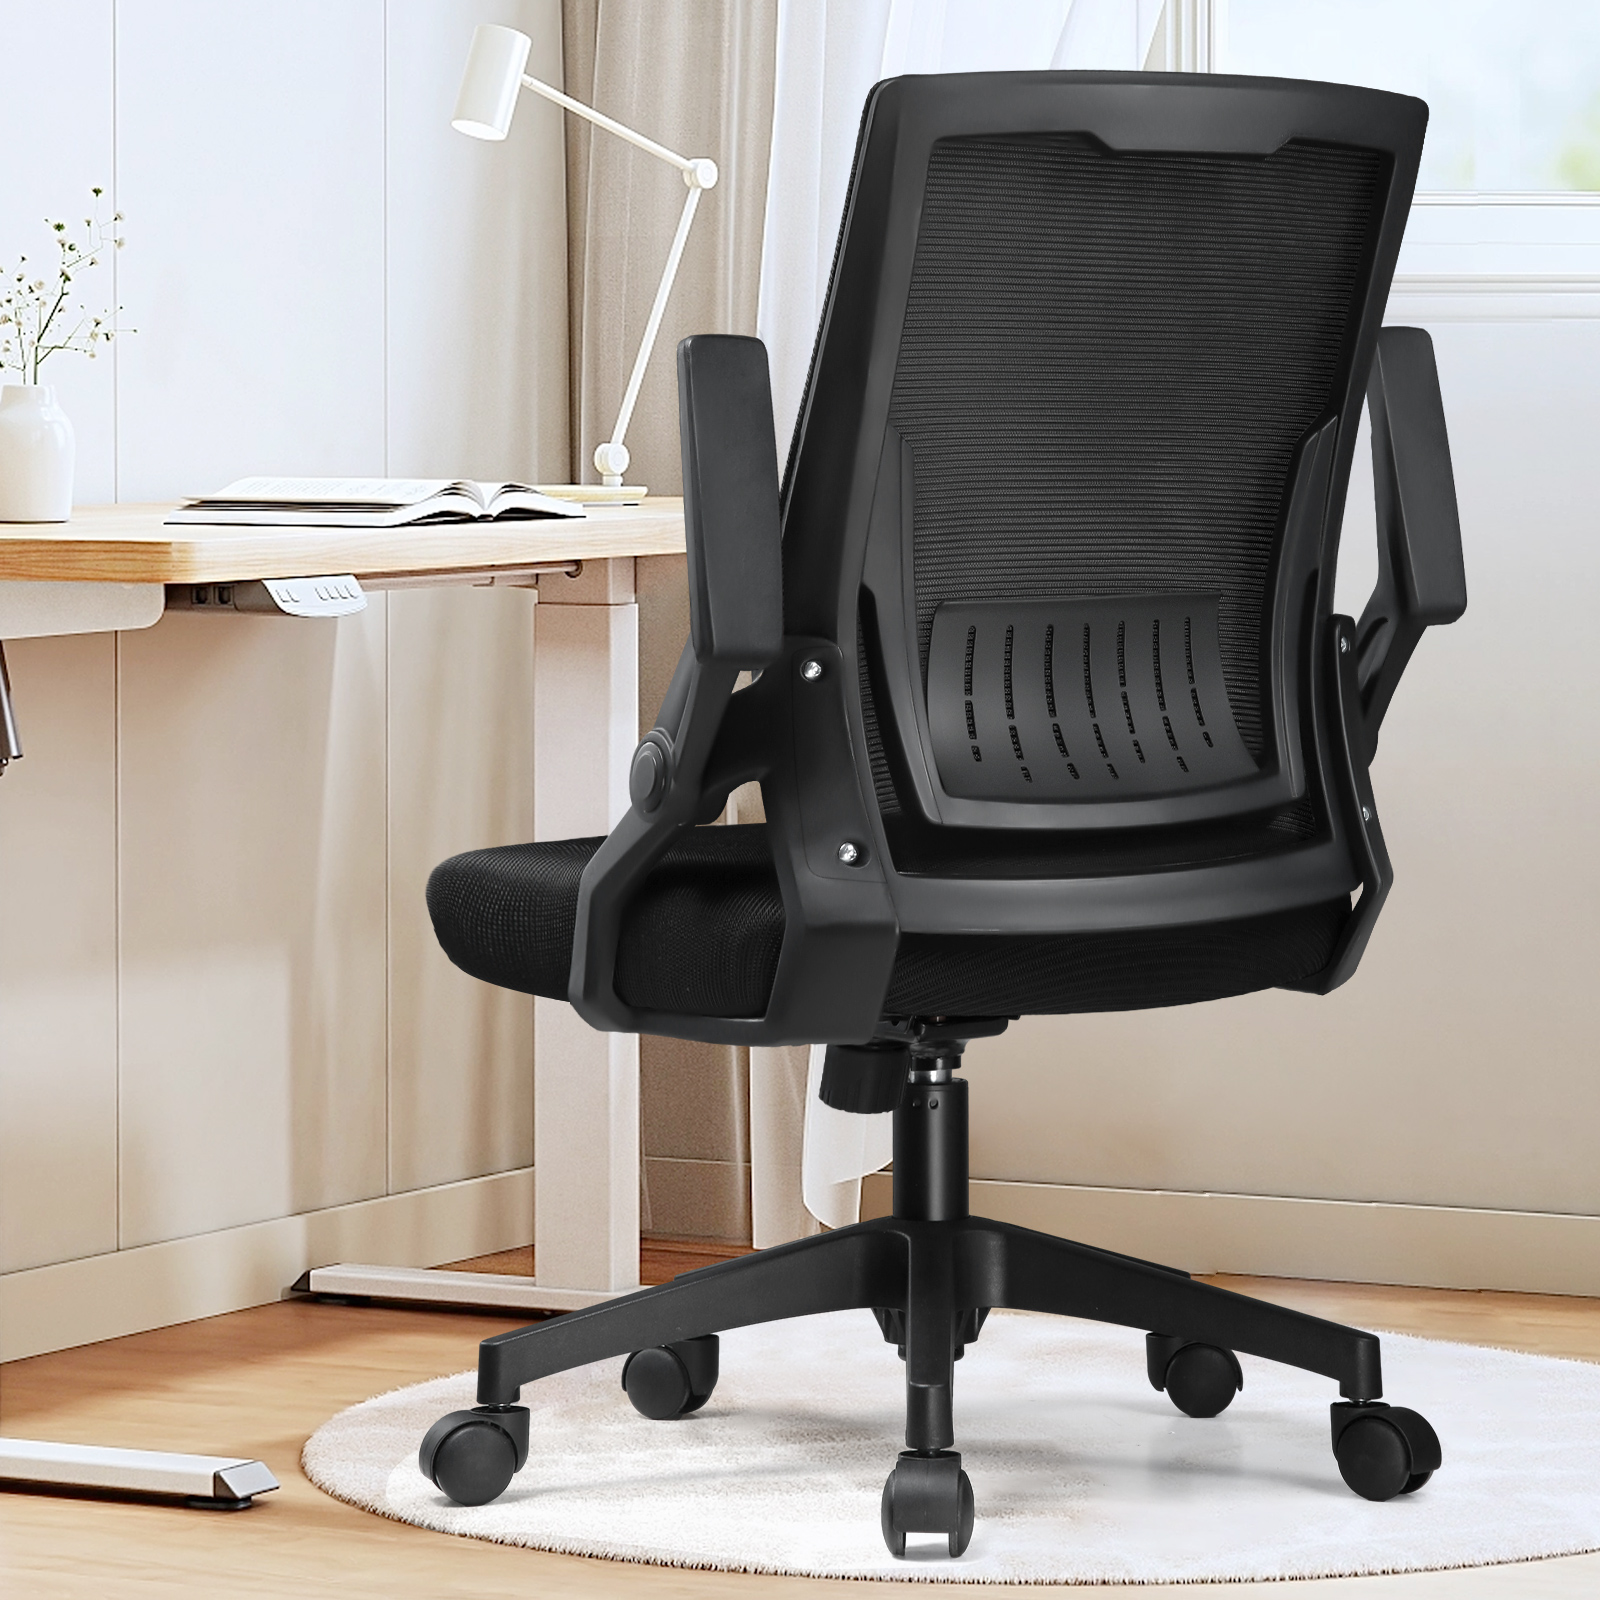 COMHOMA Mesh Office Chair with Flip-Up Armrests Mid Back Computer Chair, Black - image 1 of 8